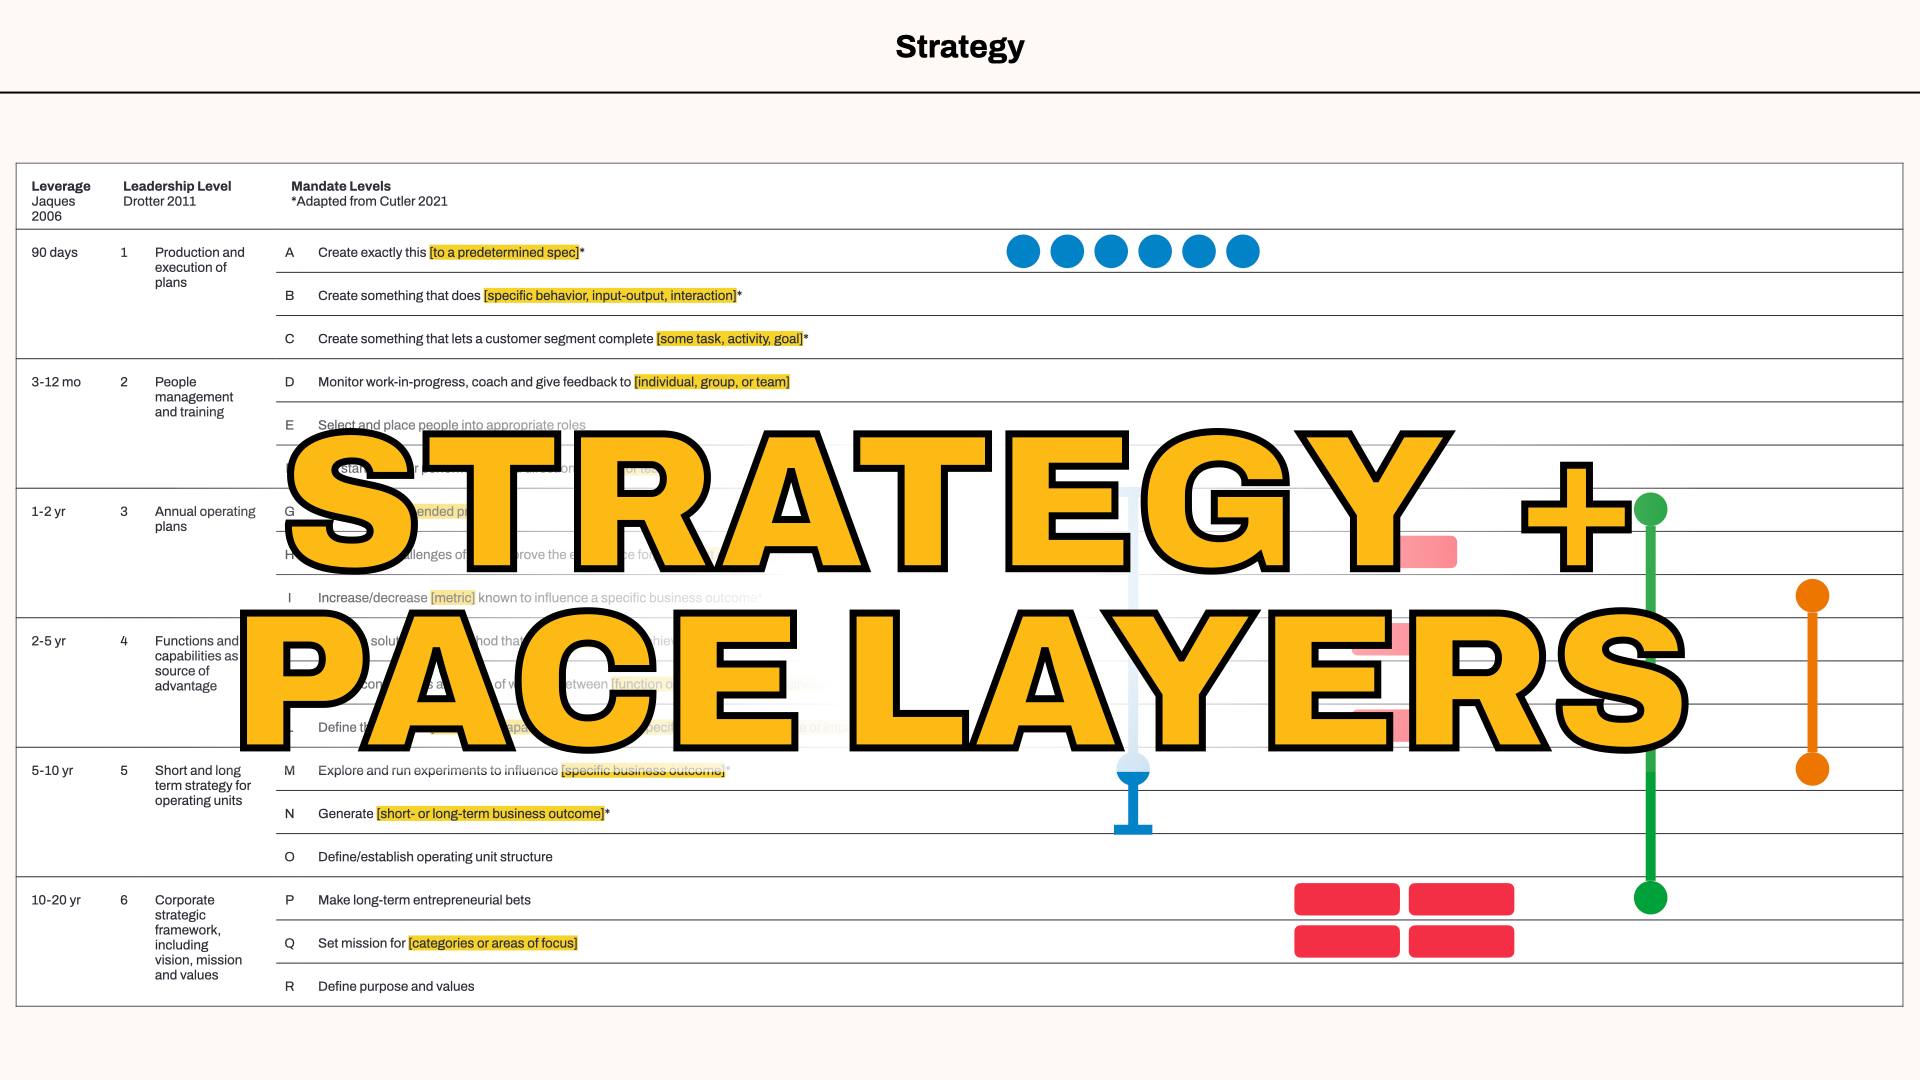 How to Combine Pace Layers, Org Design, and Strategy